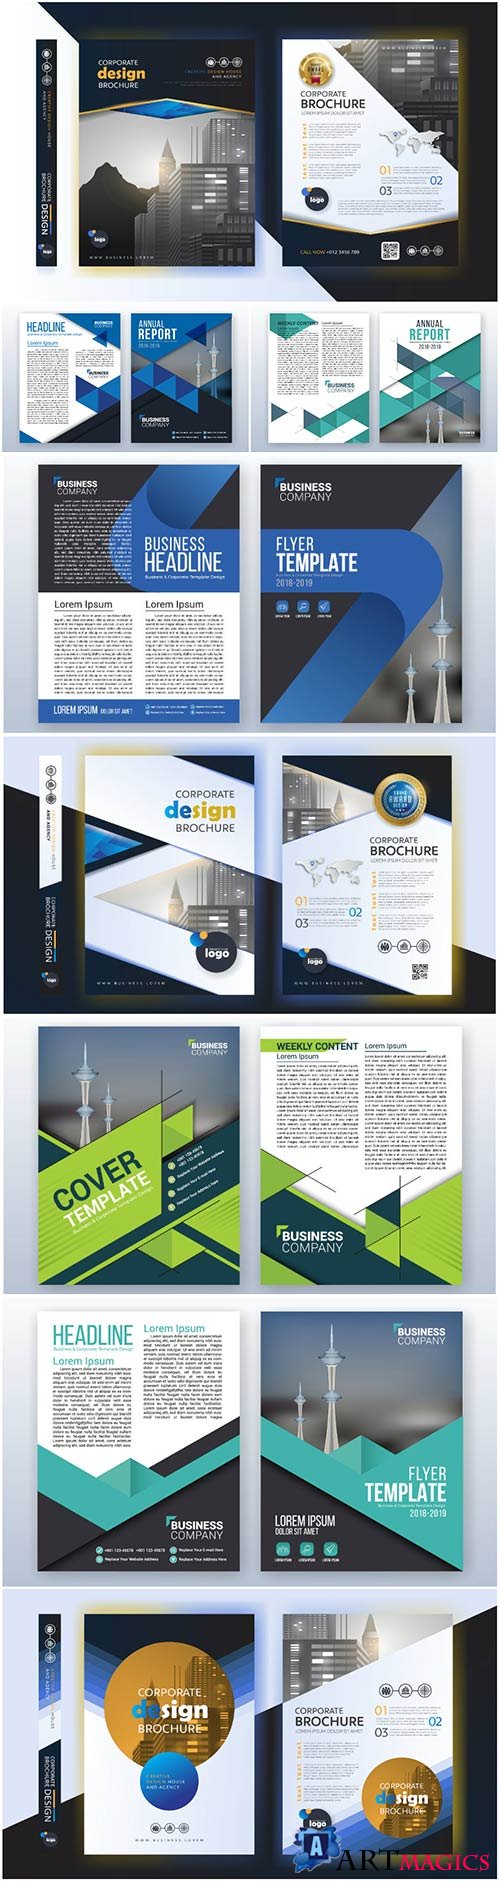 Brochure template vector layout design, corporate business annual report, magazine, flyer mockup # 213